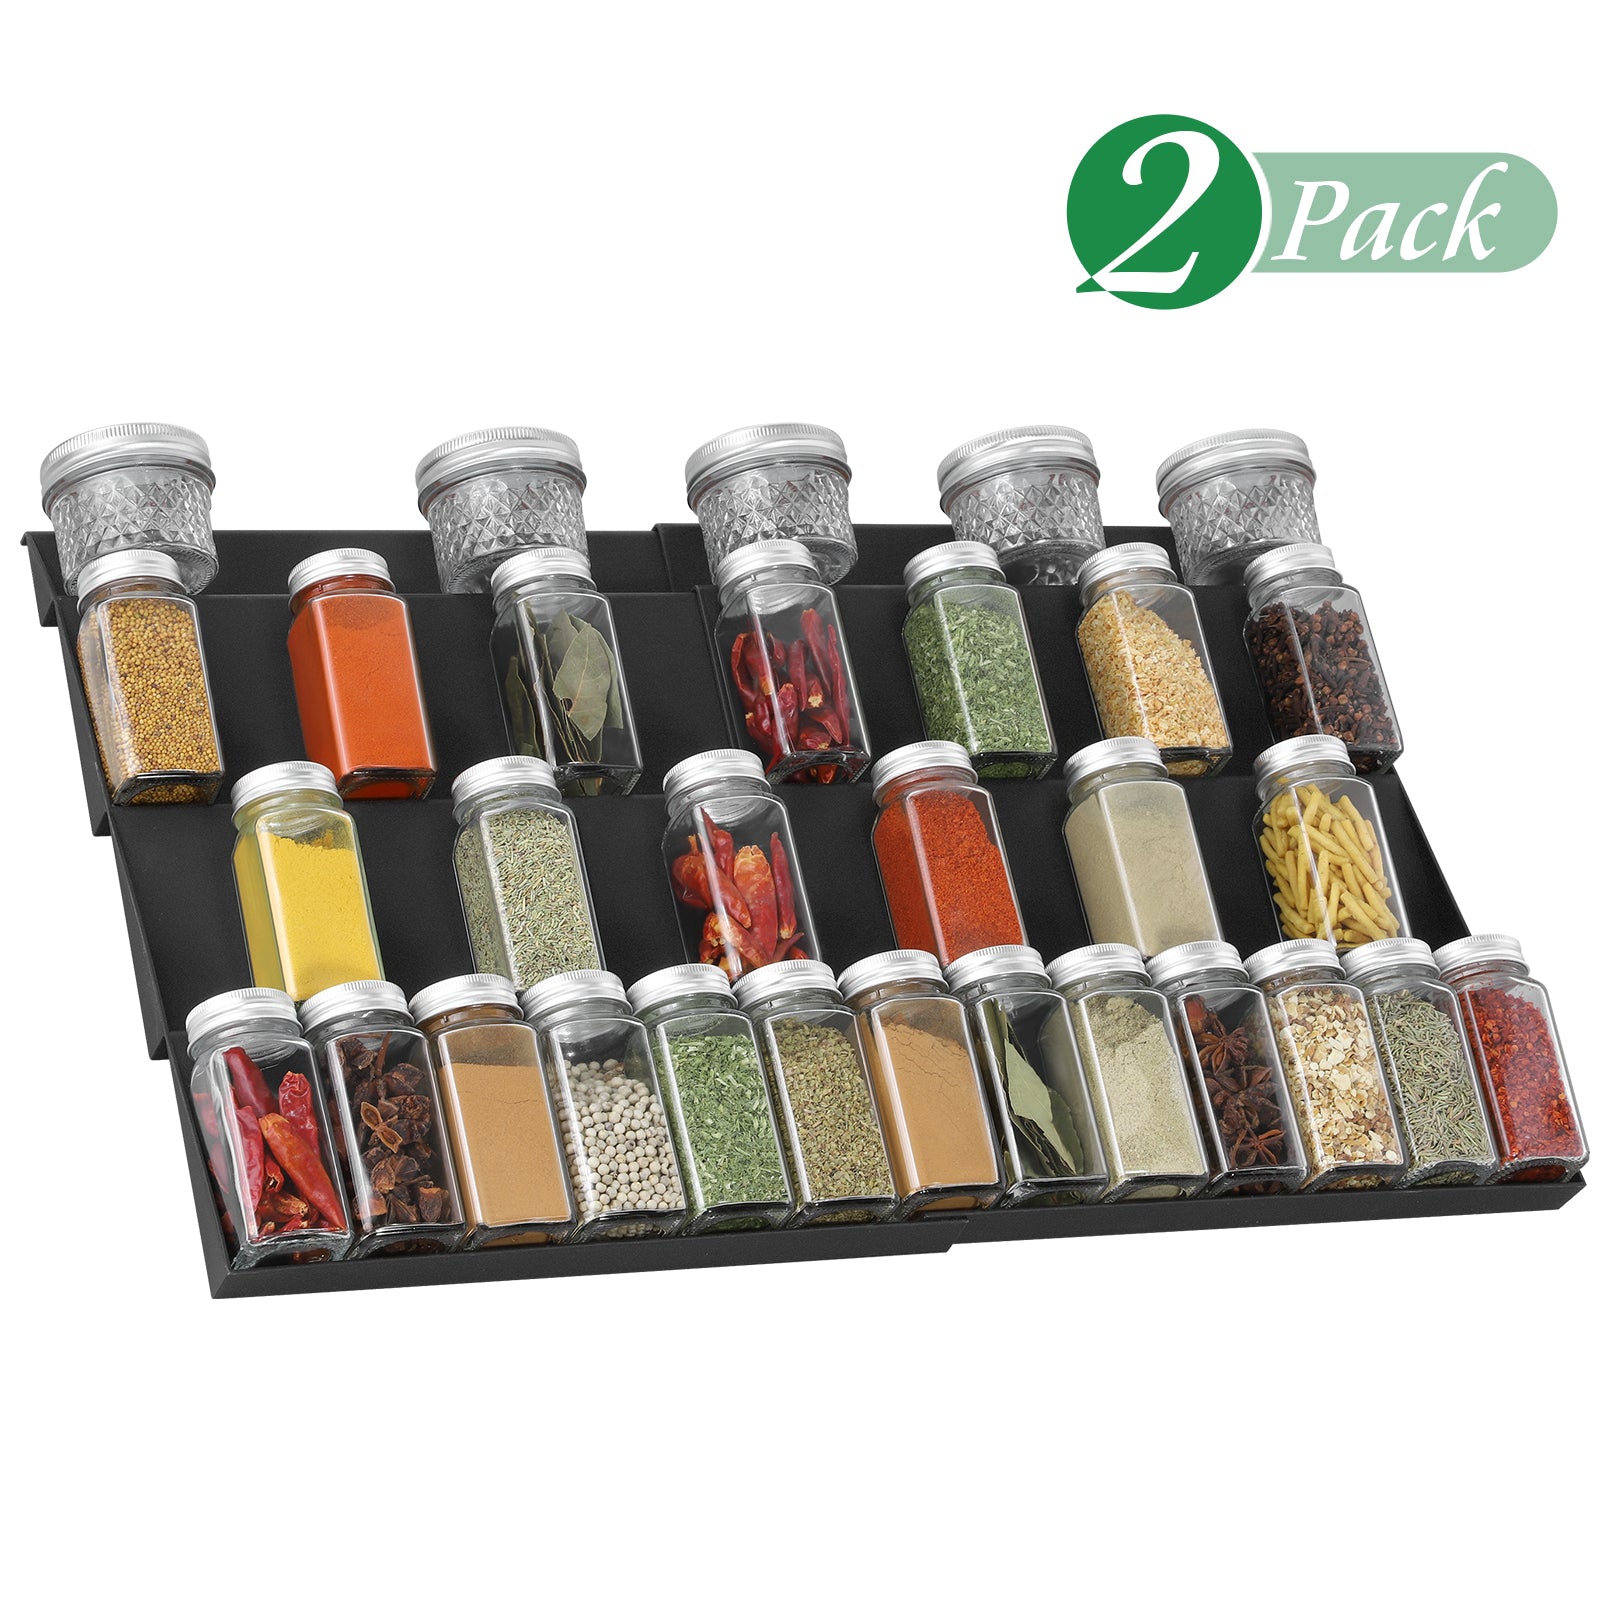 KOOVON Expandable Spice Rack Tray, Plastic Spice Organizer Drawer for